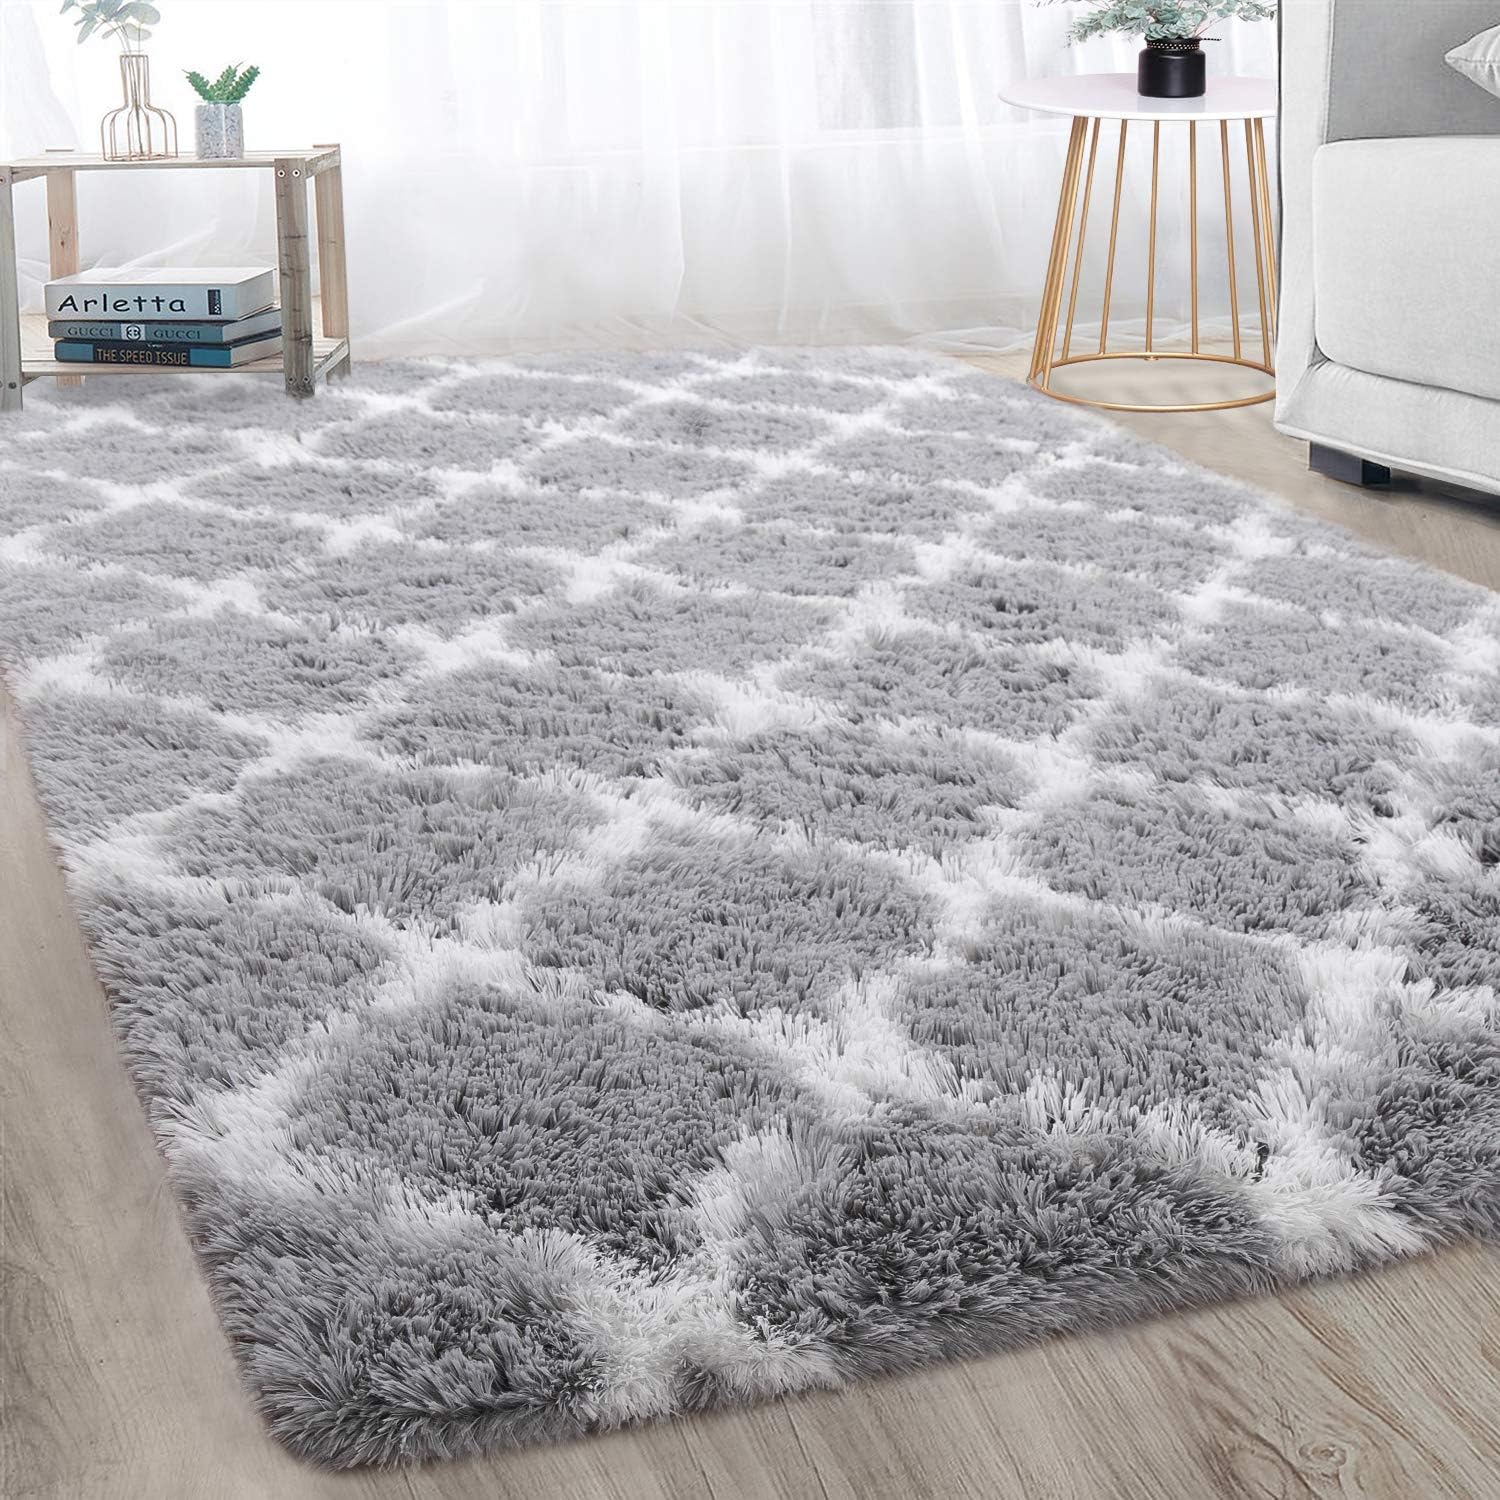 Merelax interior doormats are made of high quality materials that are anti-slip and wear resistant, effectively preventing dust and dirt from entering the room, and are the perfect choice for your home life.